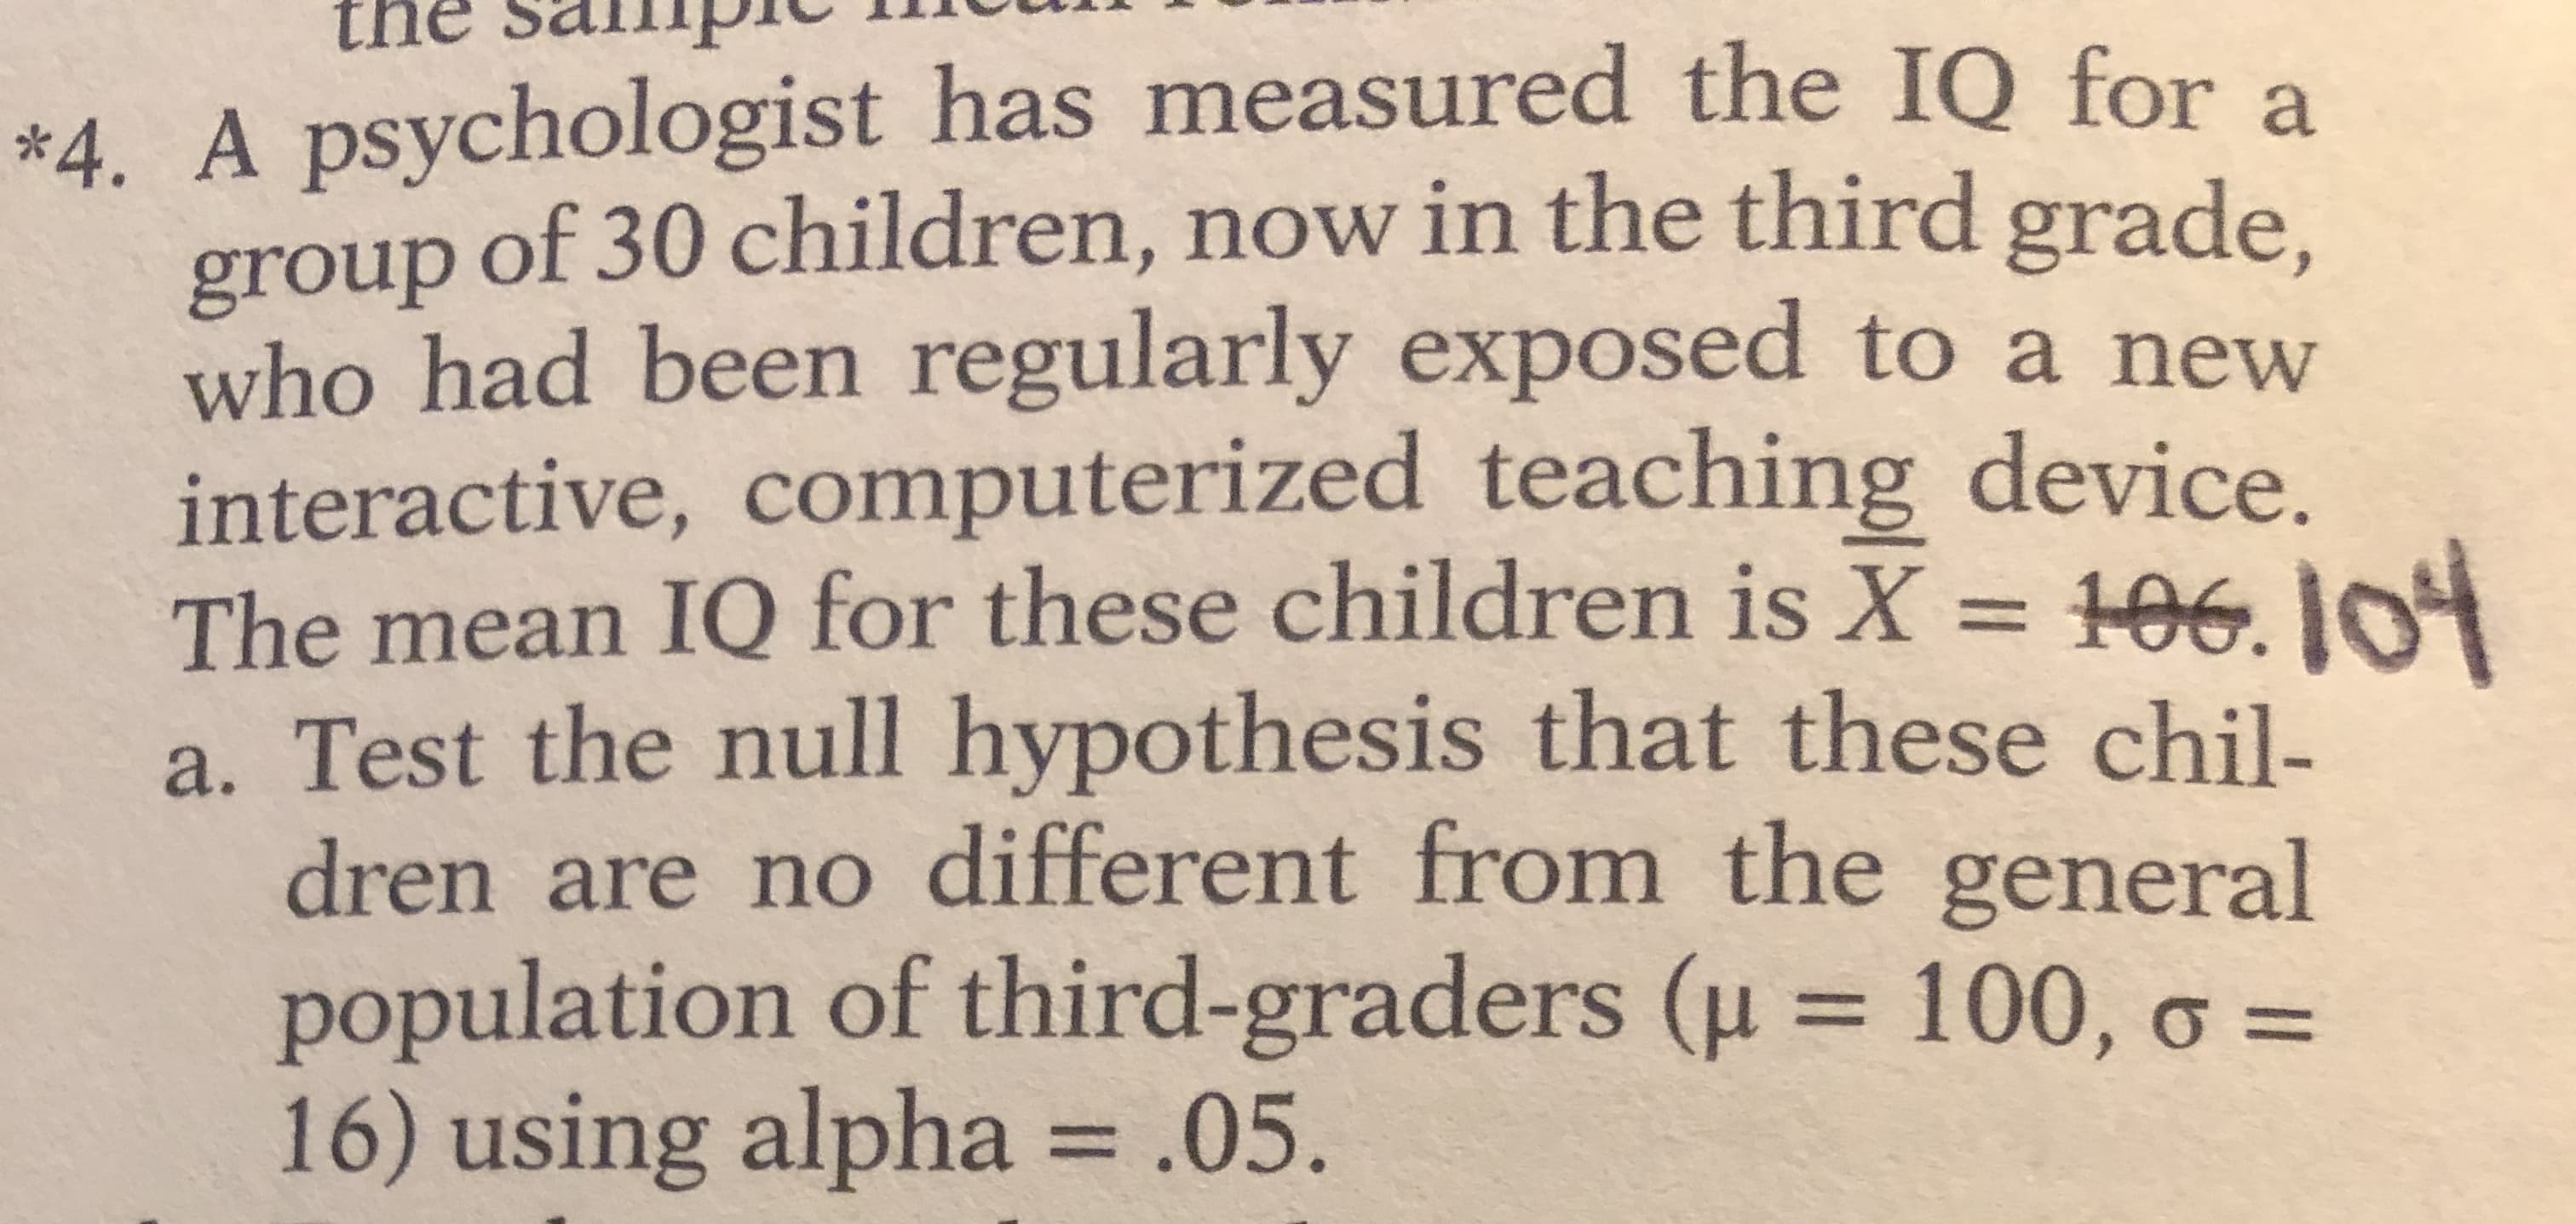 A psychologist has measured the IQ for a
group of 30 children, now in the third grade.
who had been regularly exposed to a new
interactive, computerized teaching device.
The mean IQ for these children is X = 106. IO
a. Test the null hypothesis that these chil-
dren are no different from the general
population of third-graders (u = 100, o =
16) using alpha = .05
%3D
%3D
%3D
